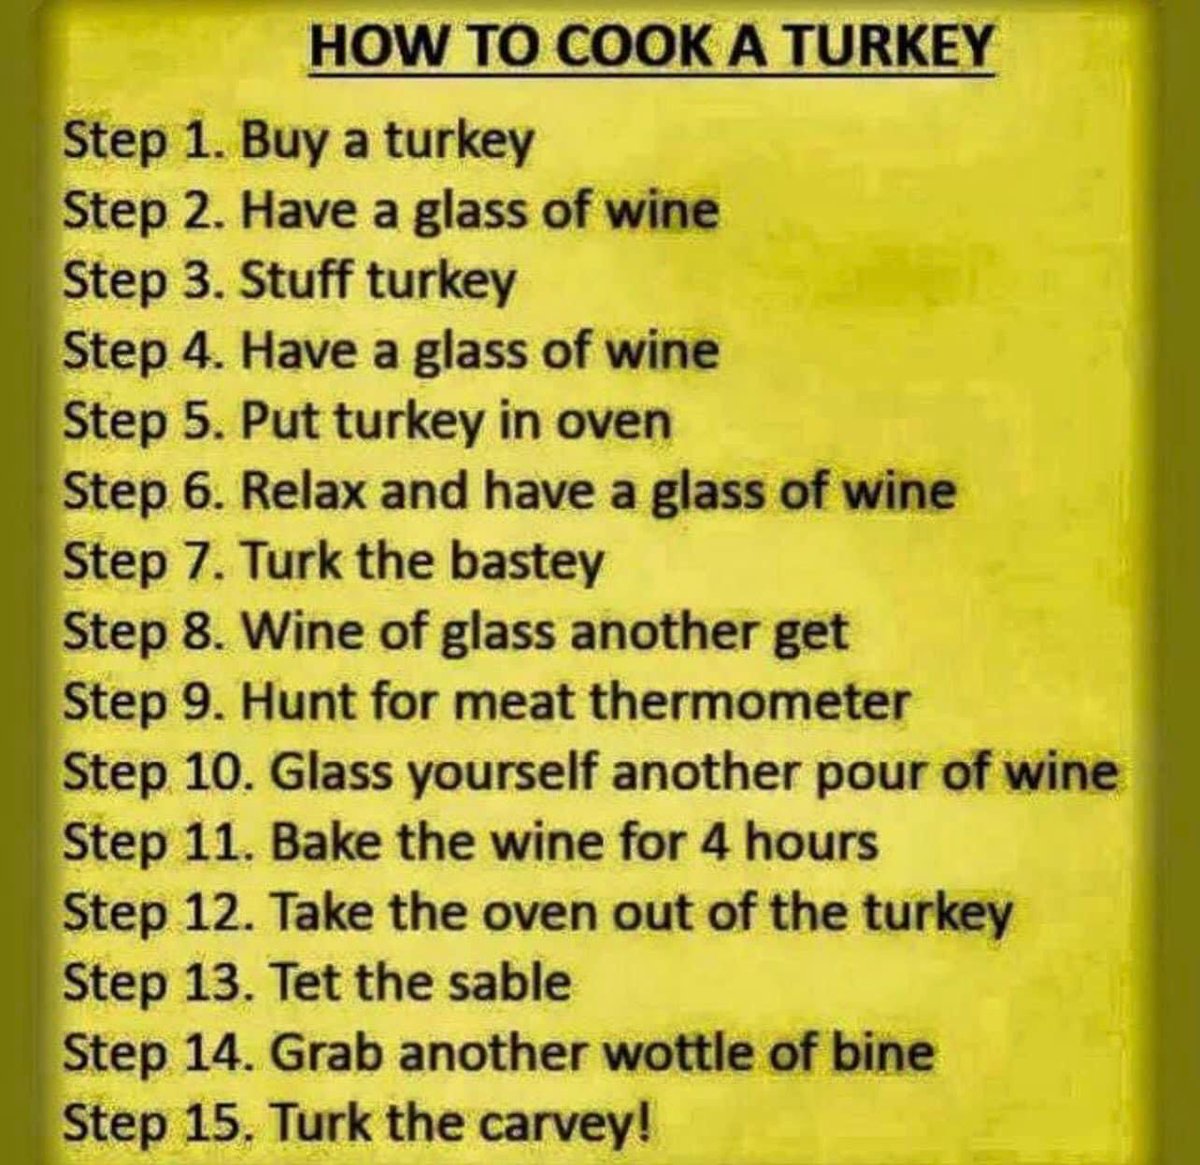 A step by step guide on how to cook a turkey! 🦃

#ChristmasCooking